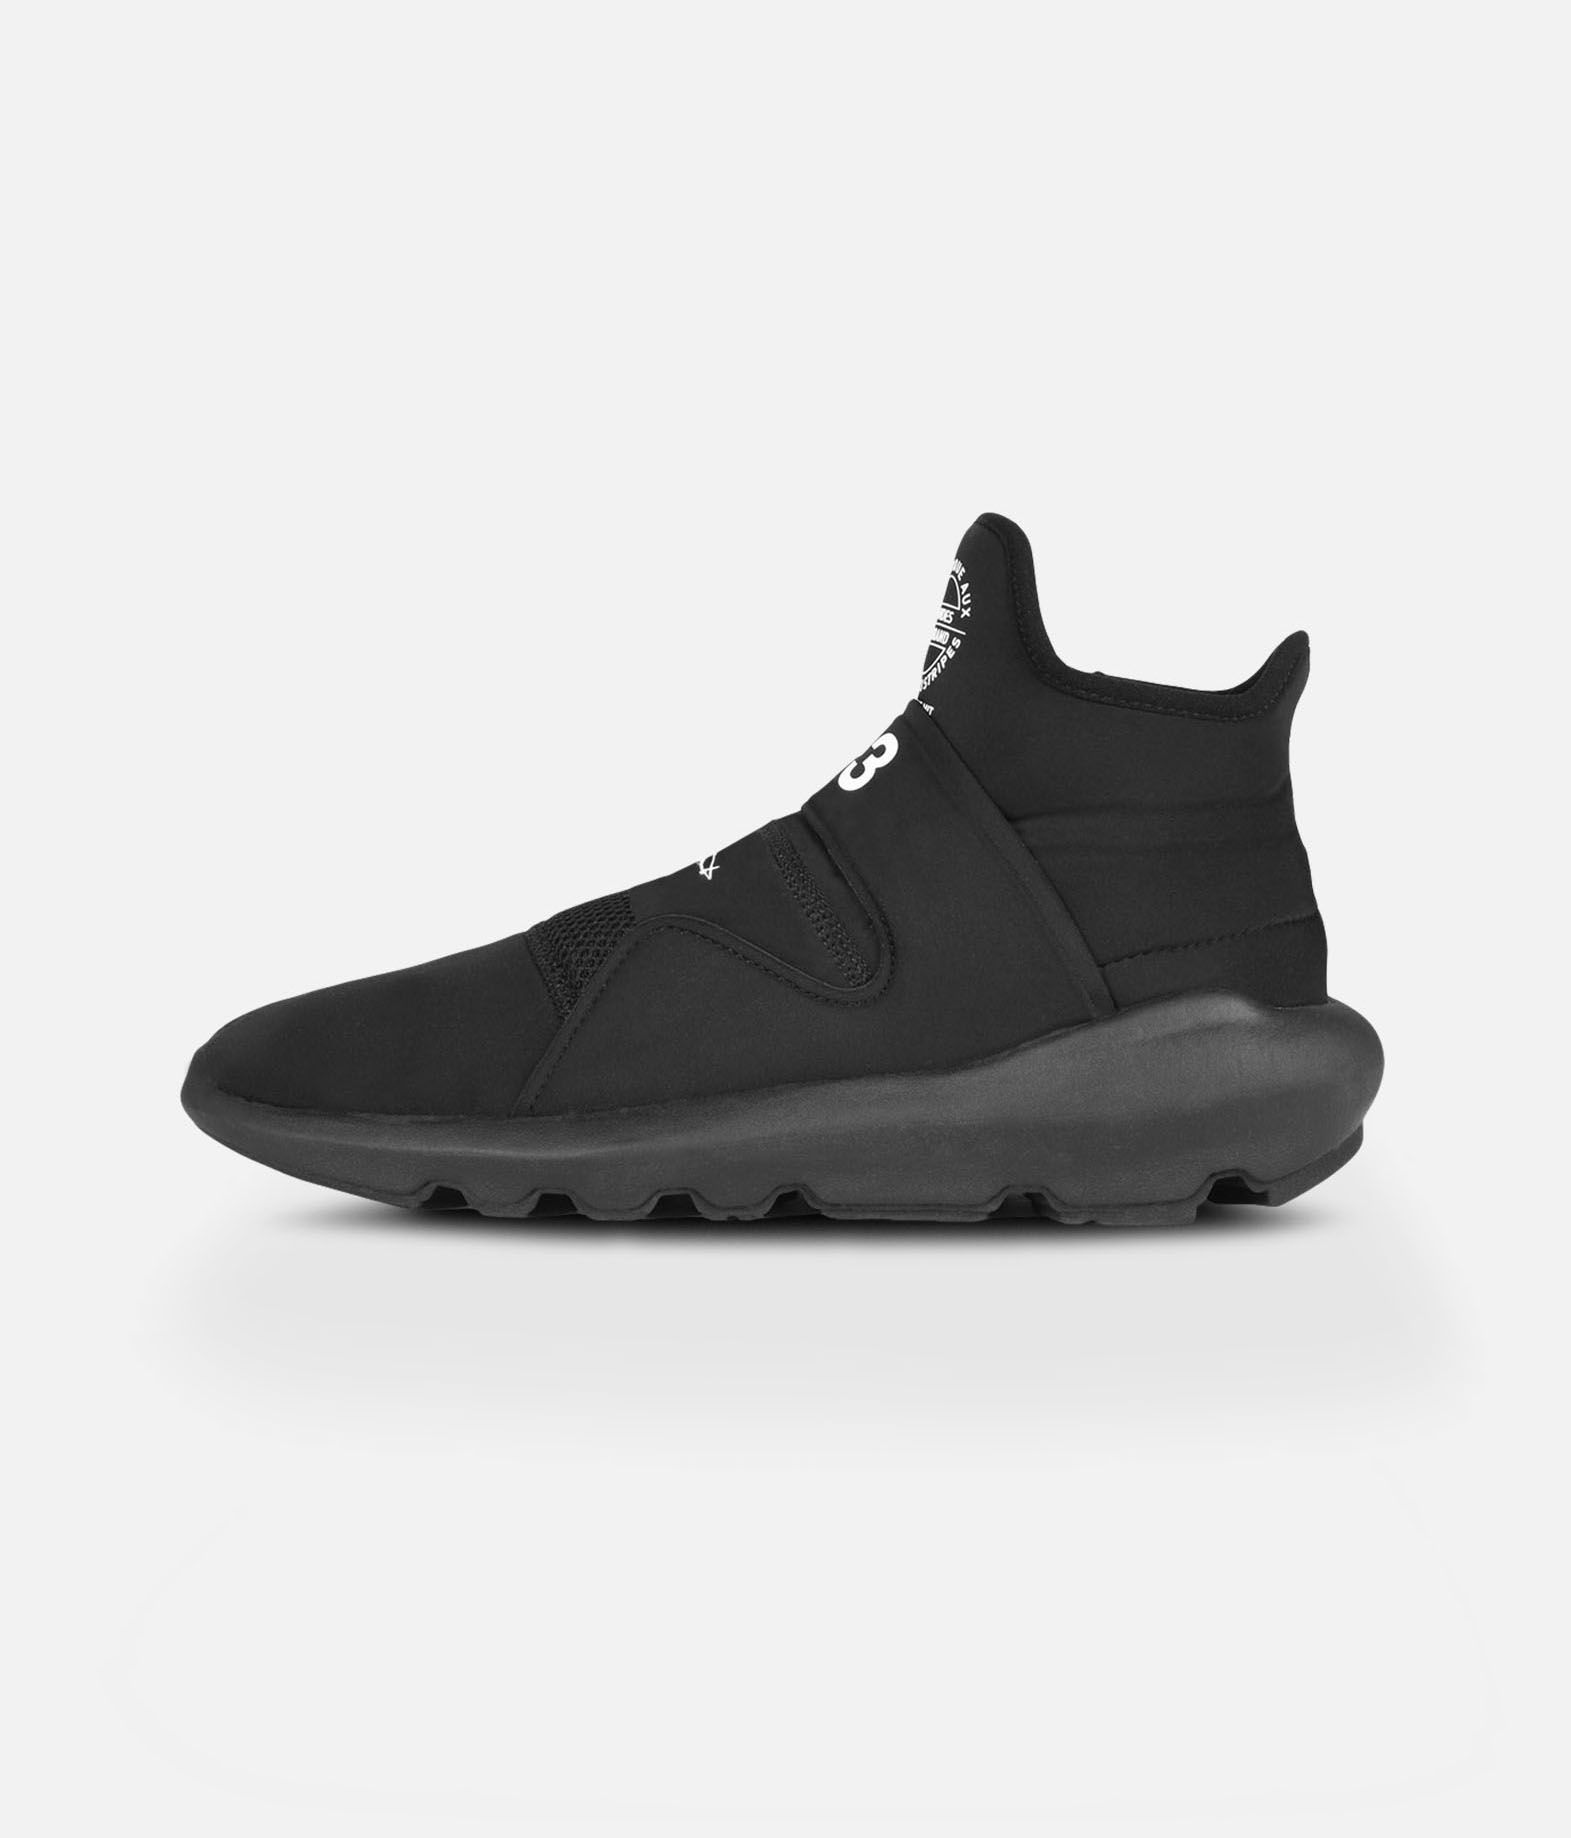 nike y3 shoes cheap online